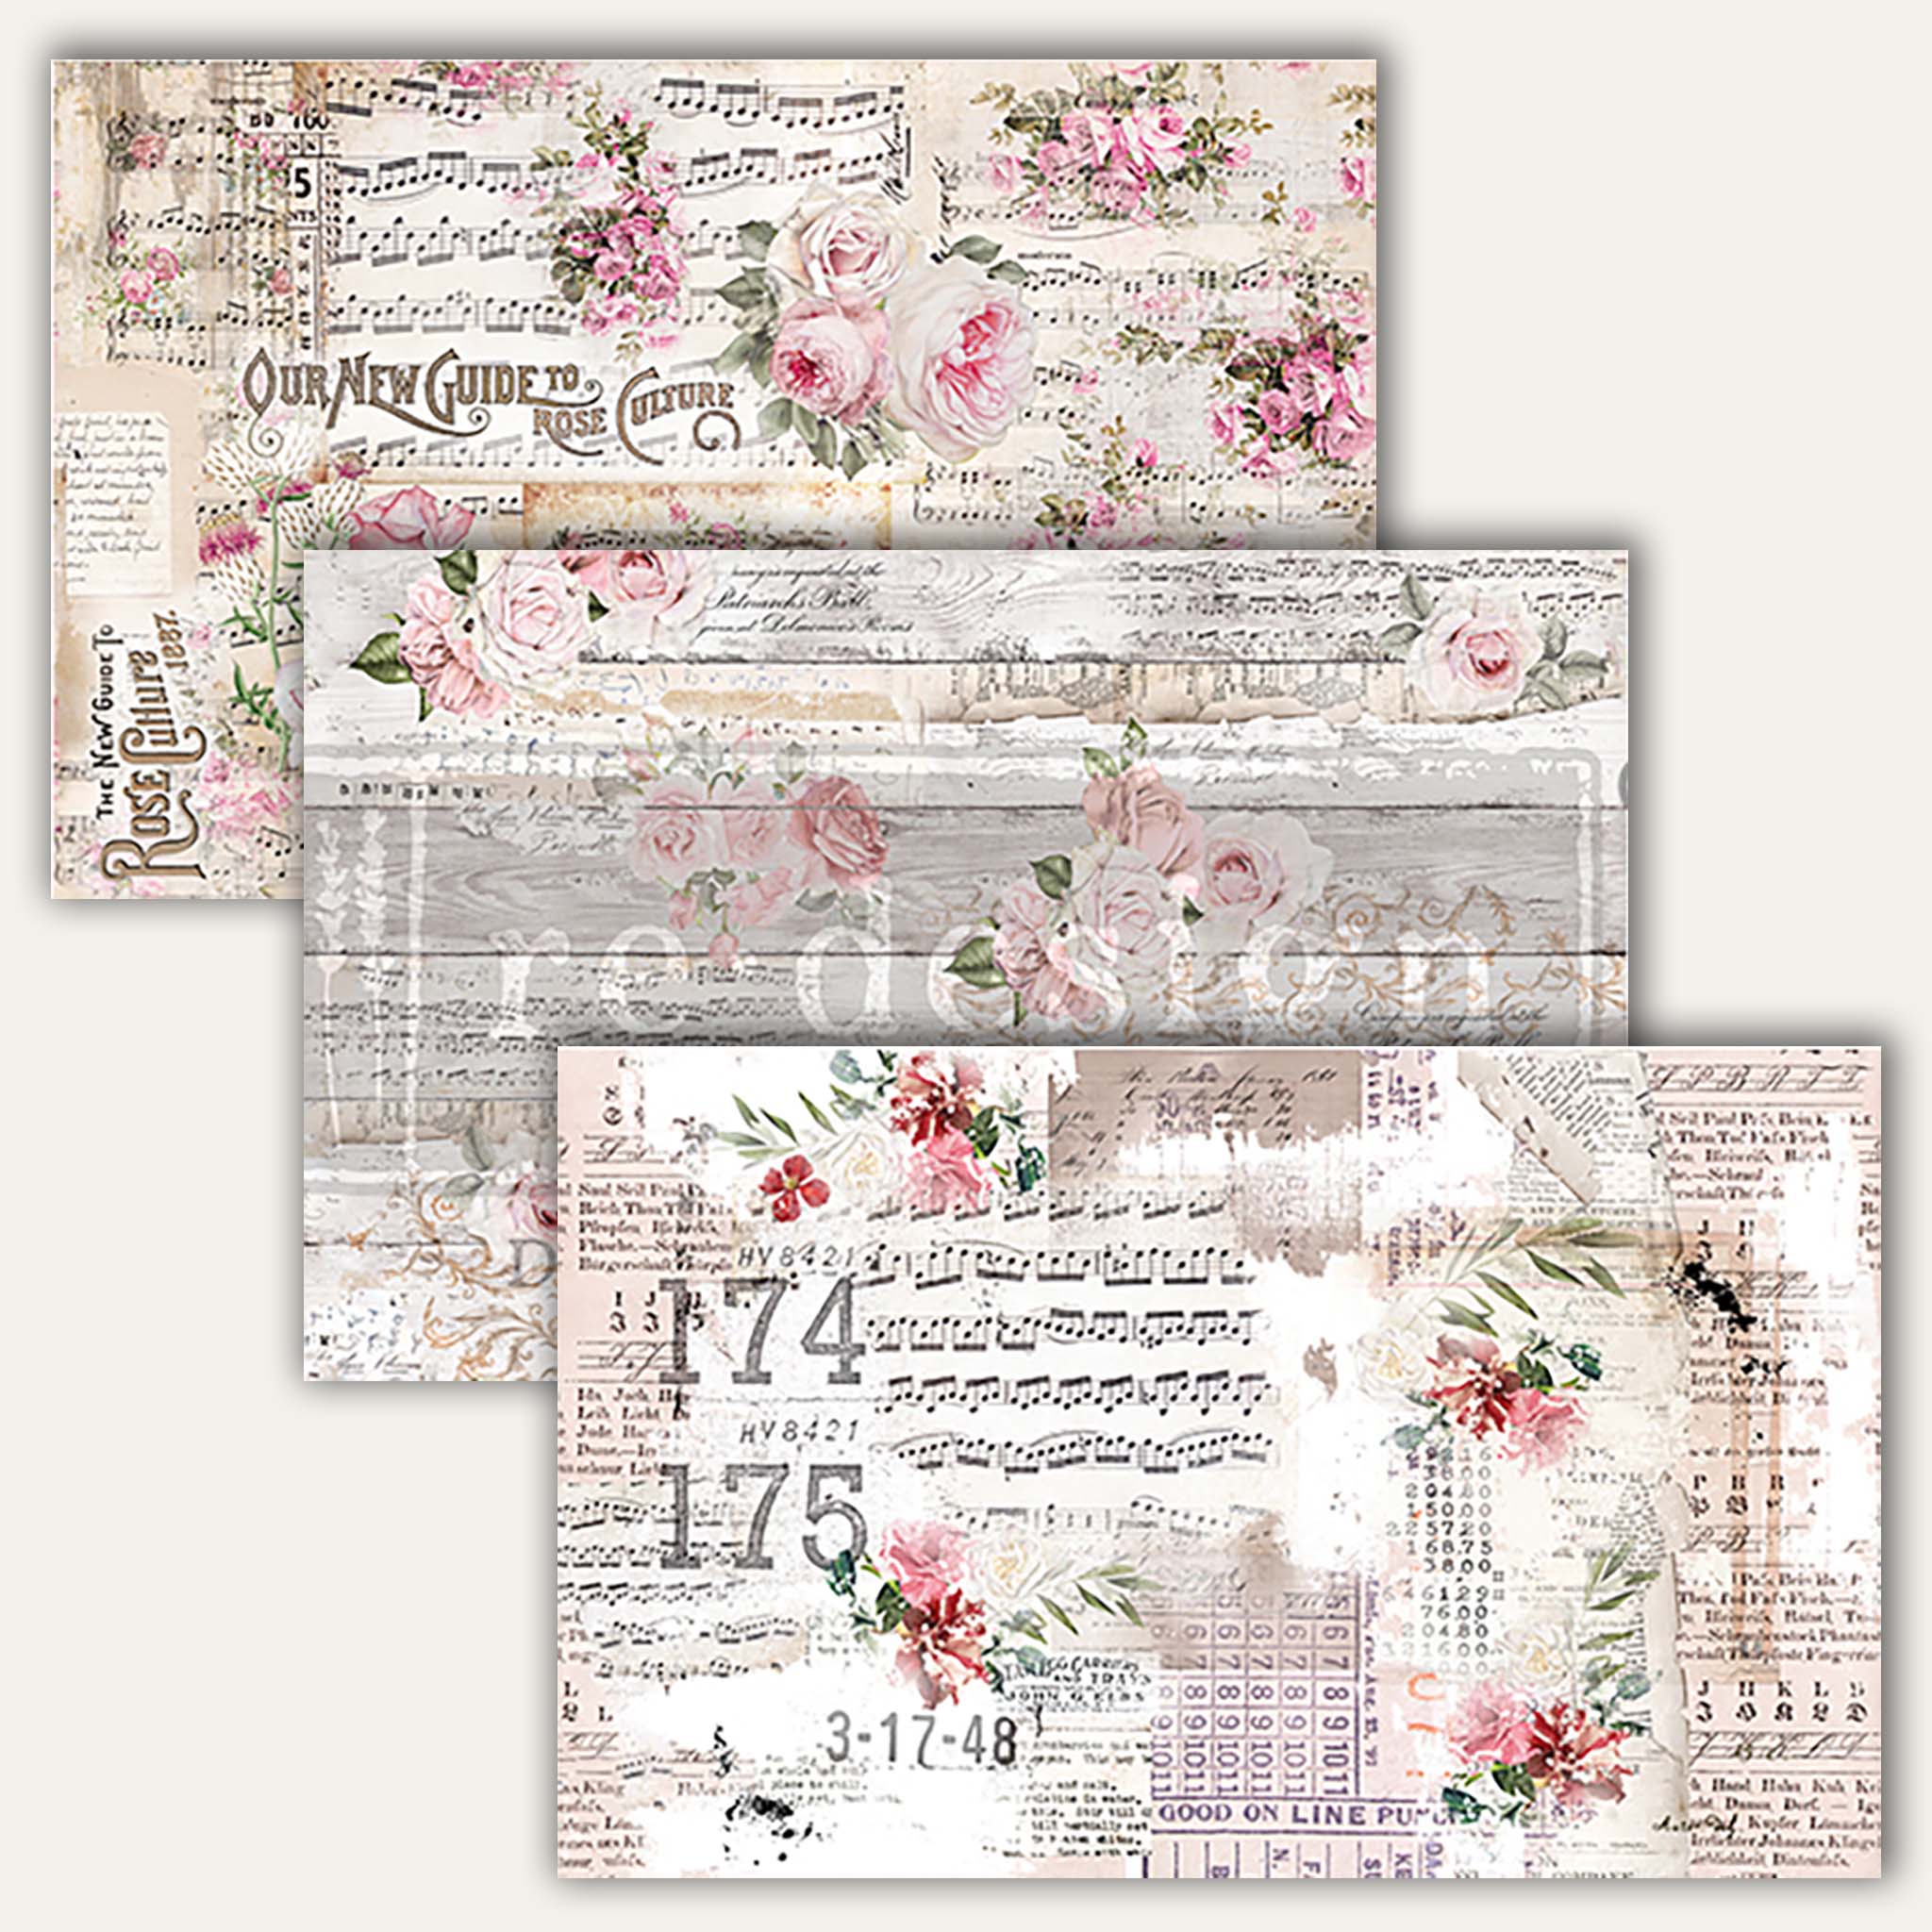 Three sheets of tissue papers featuring unique designs of script, sheet music, and pink roses.